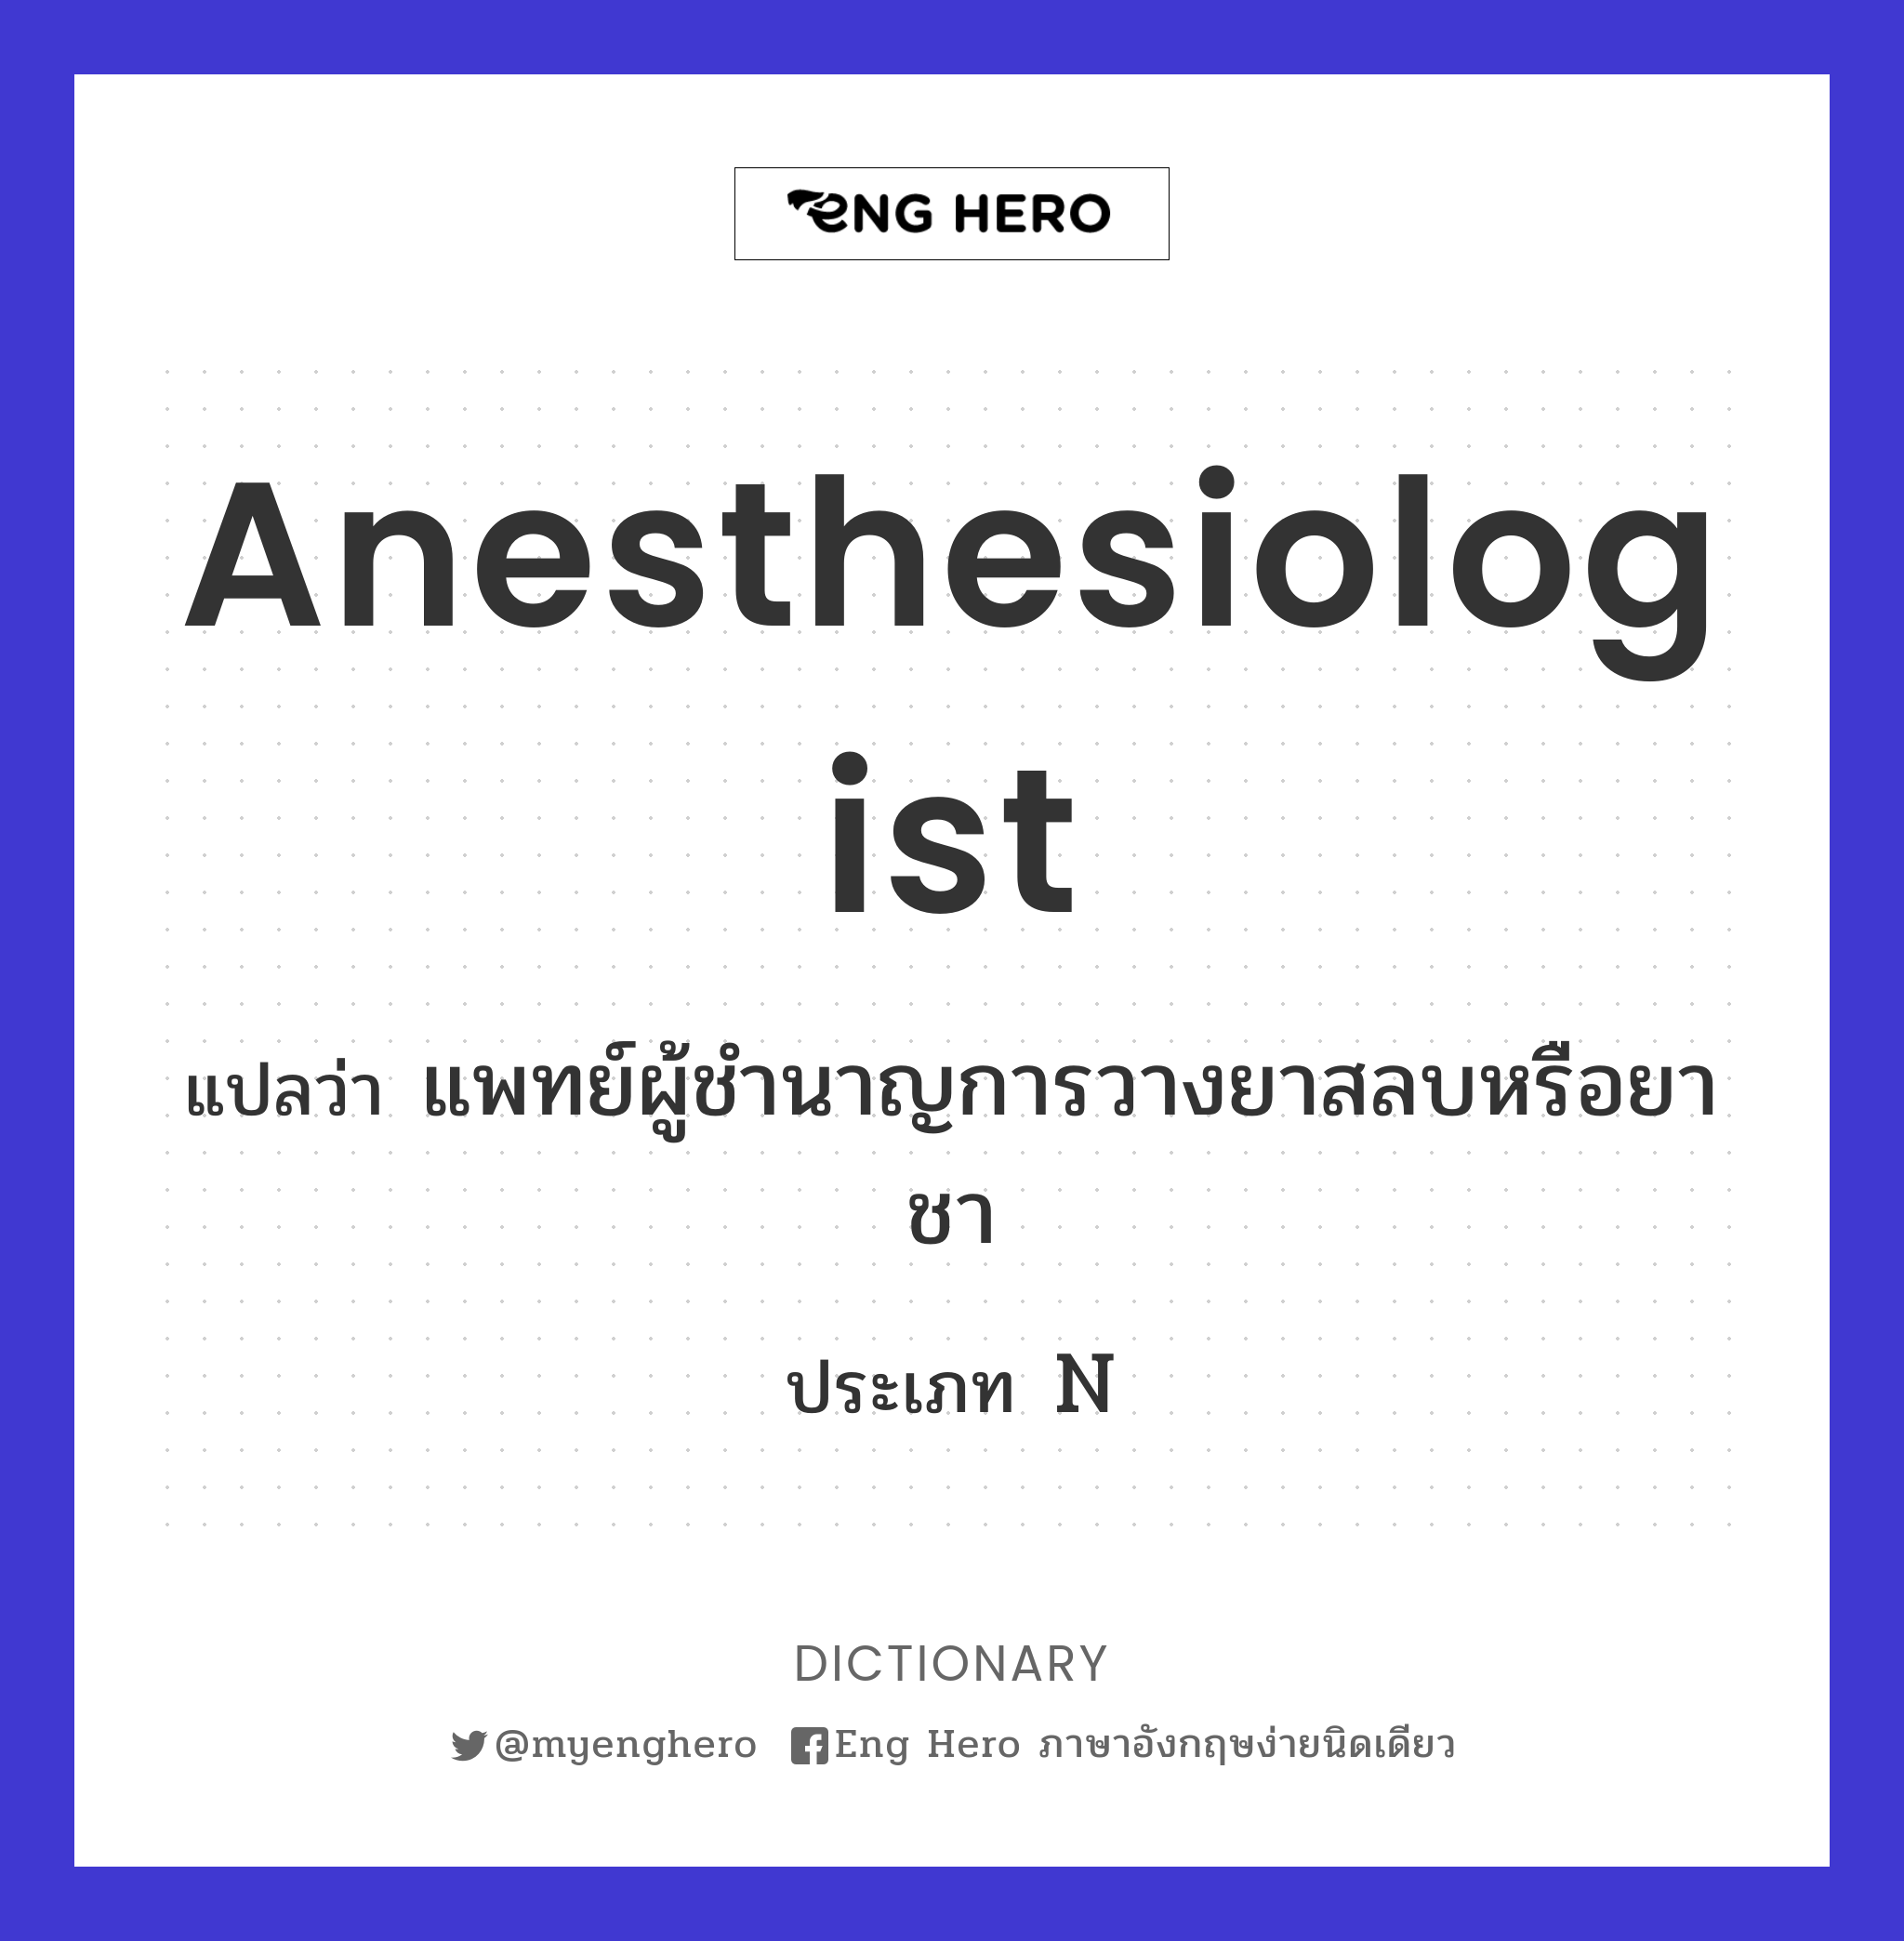 anesthesiologist